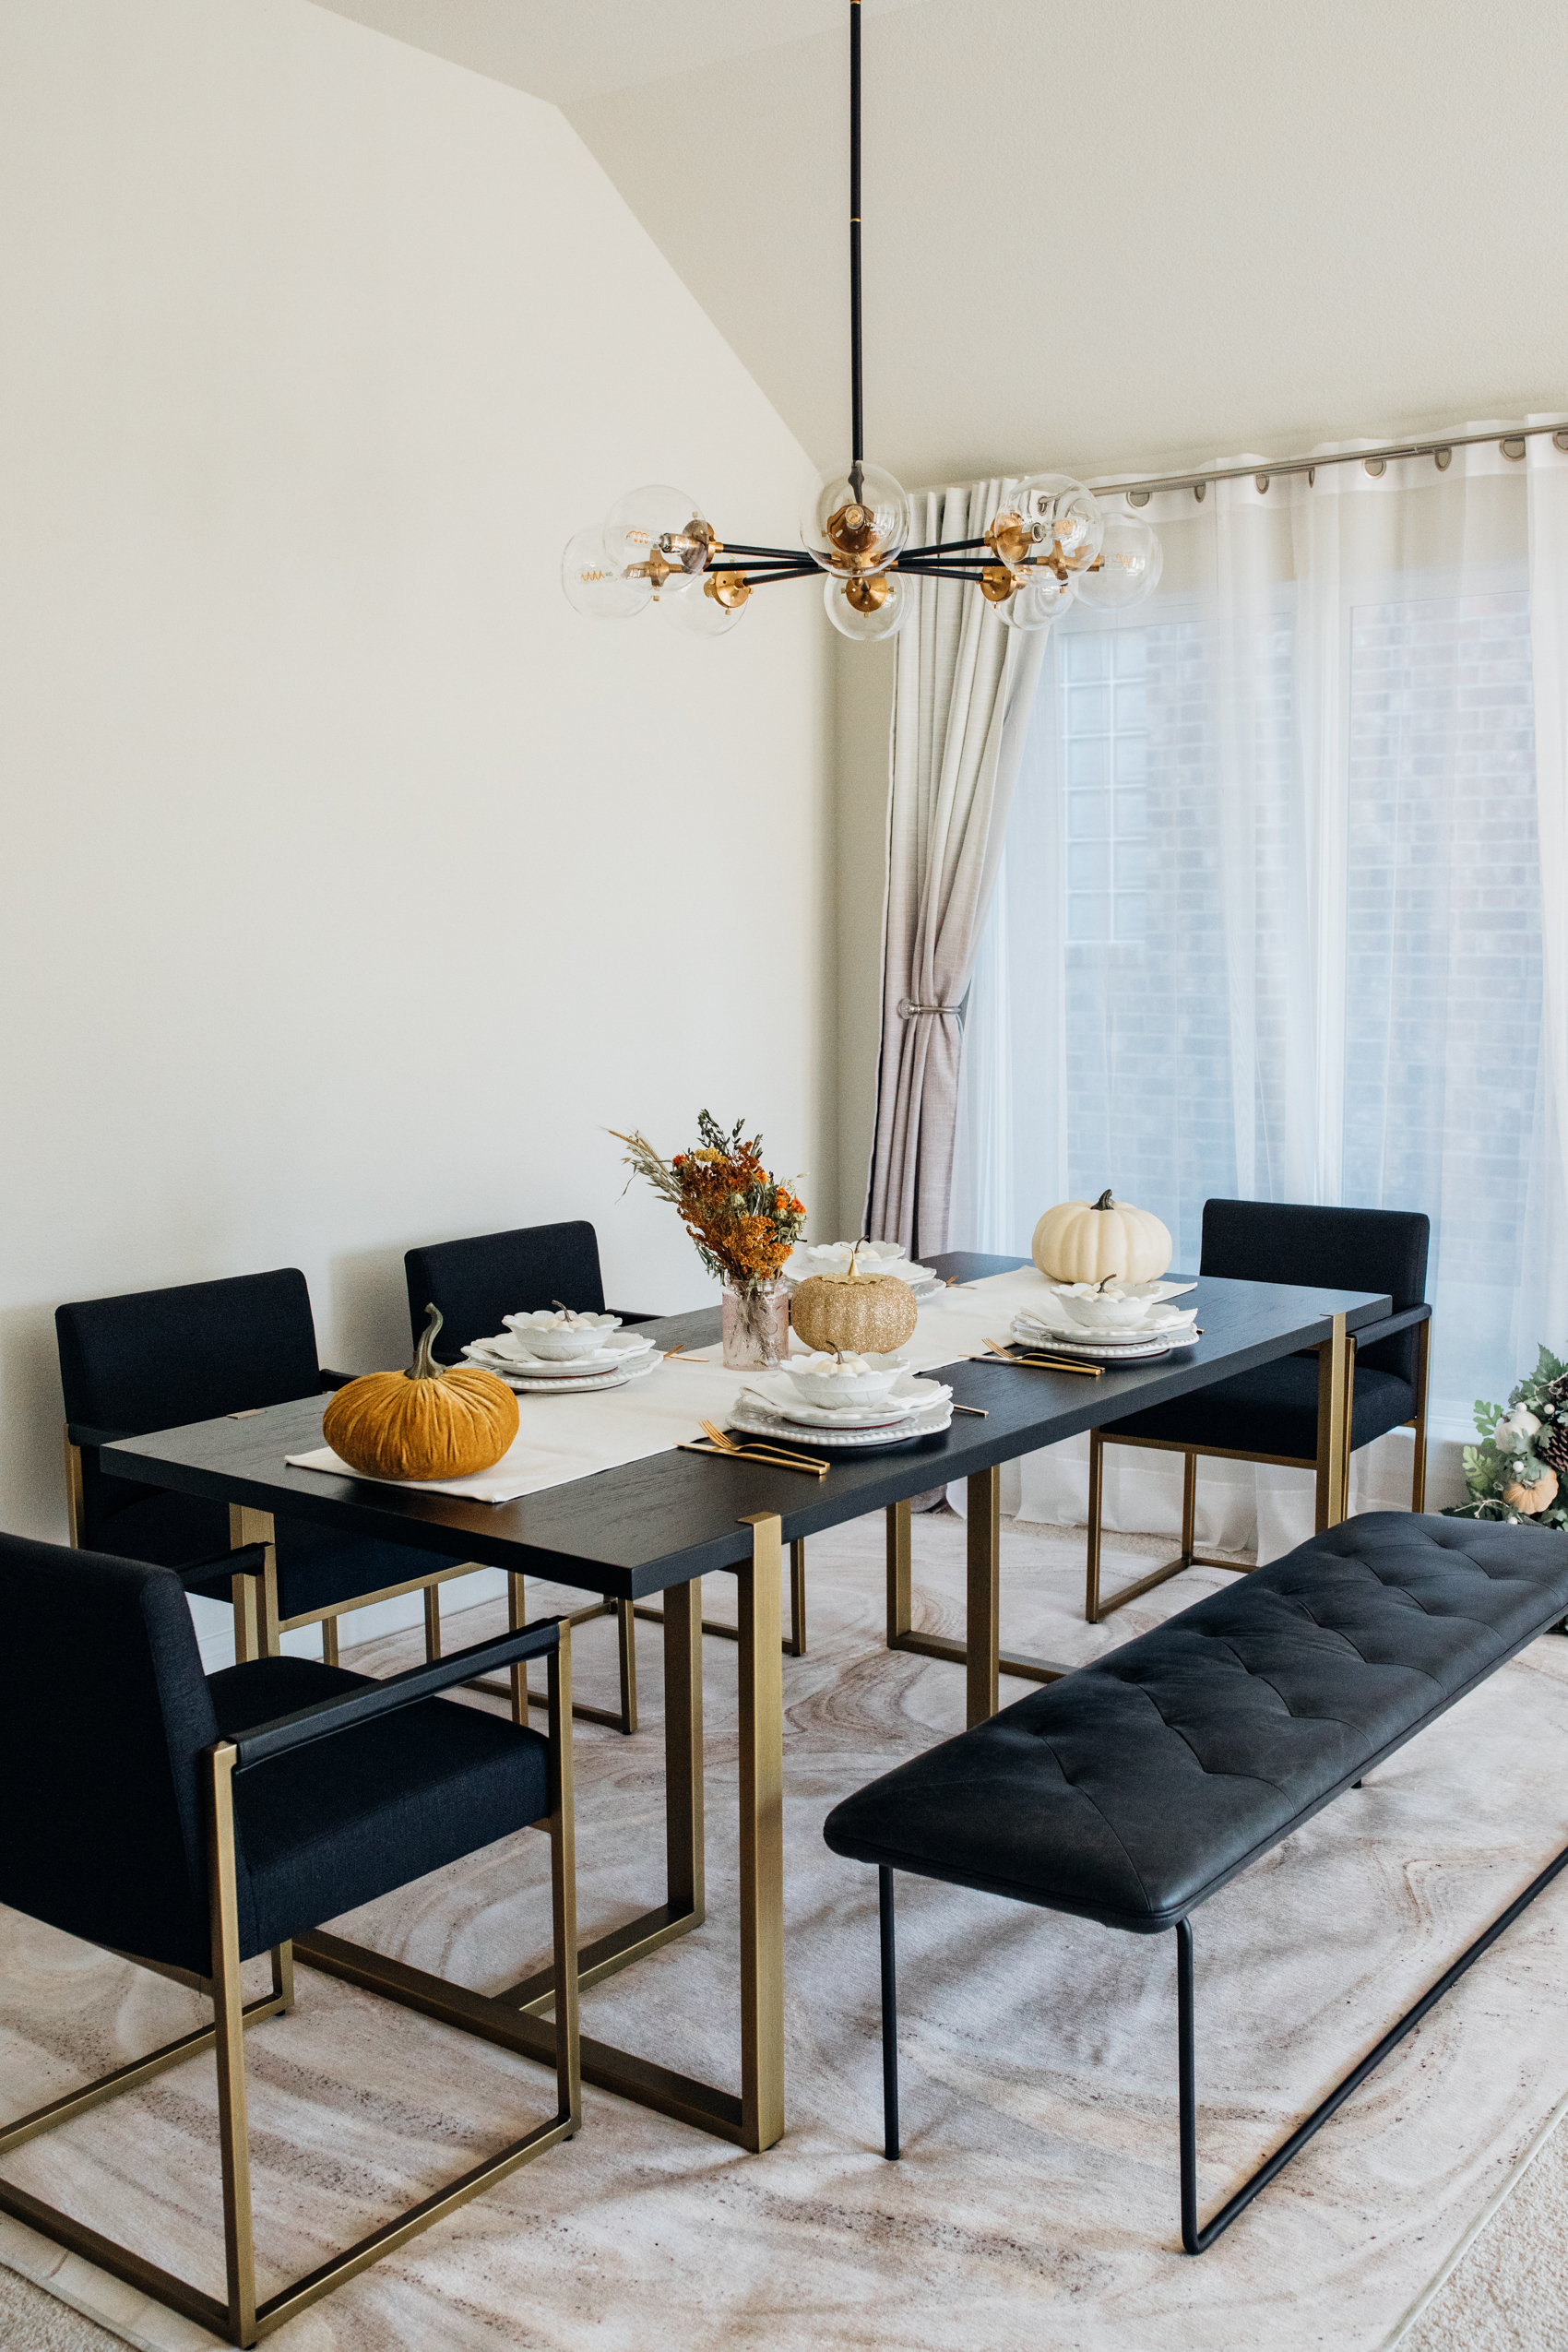 Article Oscuro dining table with gold legs in a modern dining room for Thanksgiving